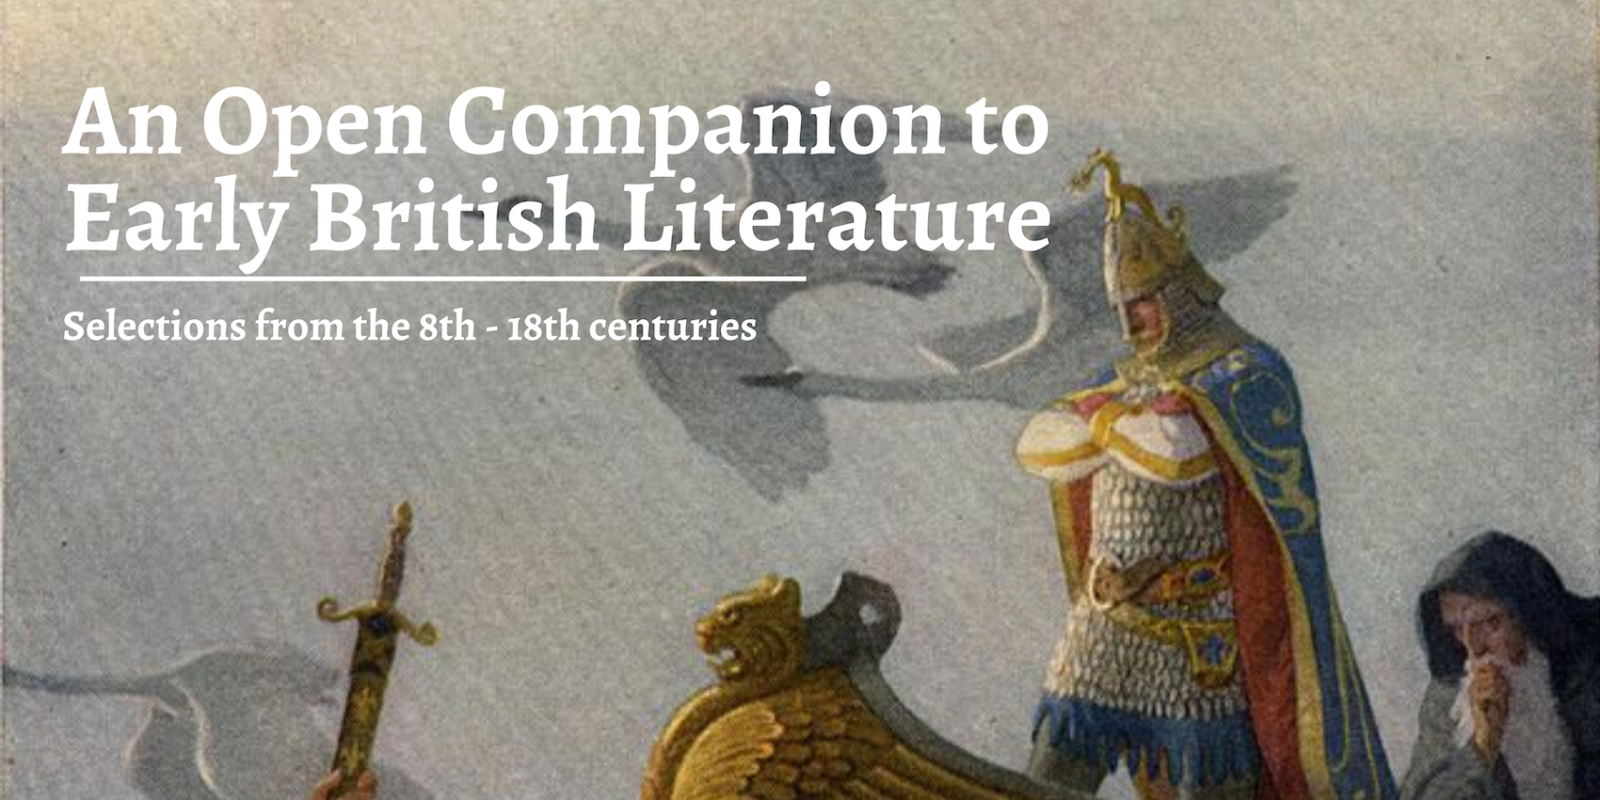 An Open Companion to Early British Literature